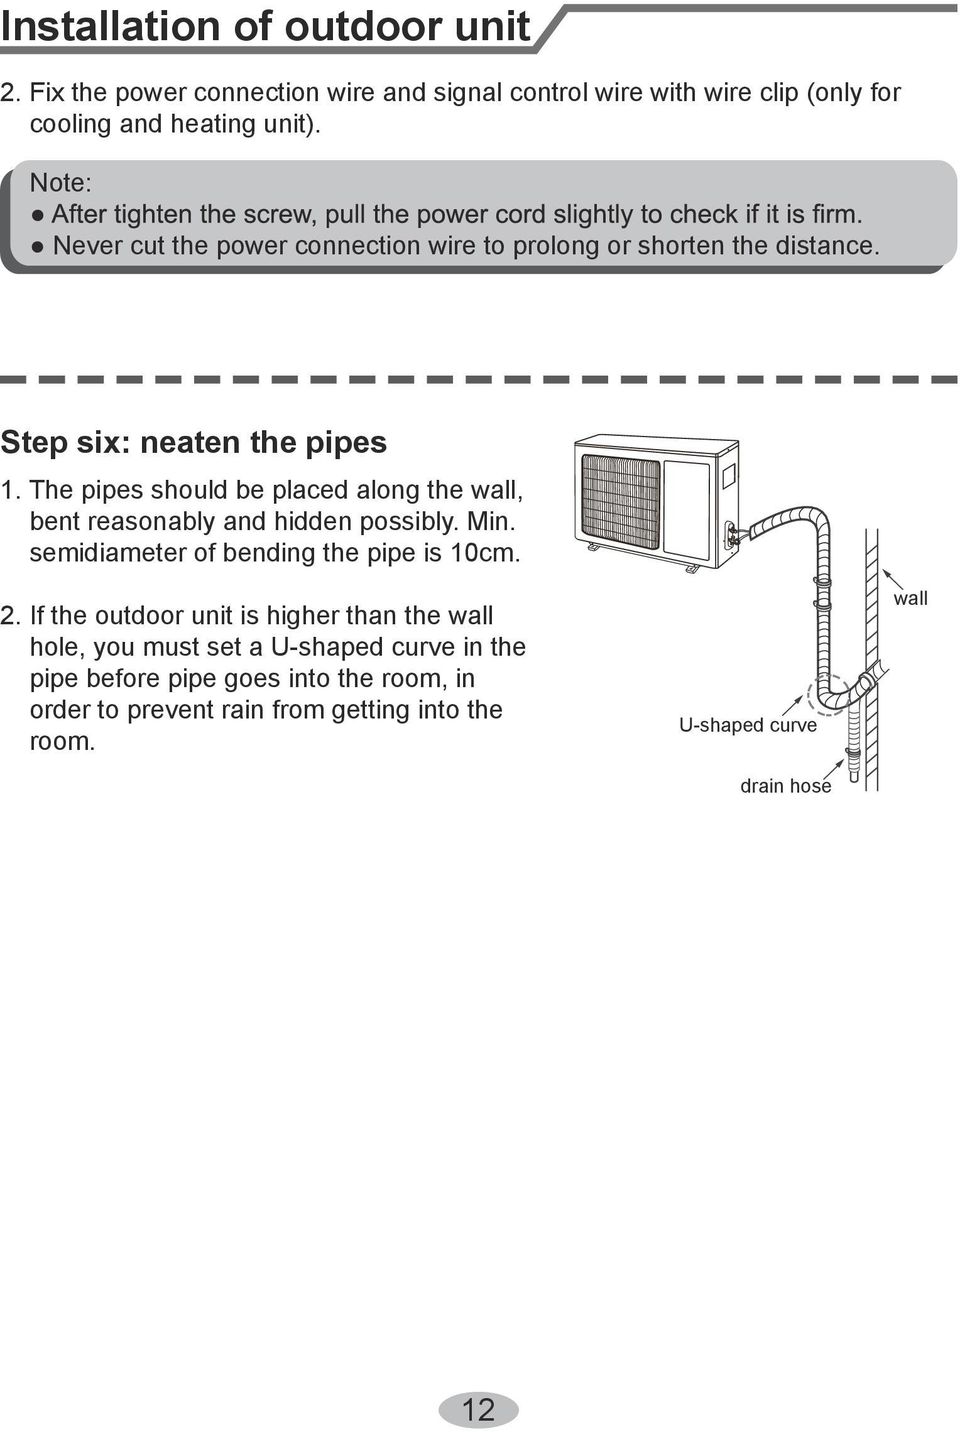 The pipes should be placed along the wall, bent reasonably and hidden possibly. Min. semidiameter of bending the pipe is 10cm. 2.